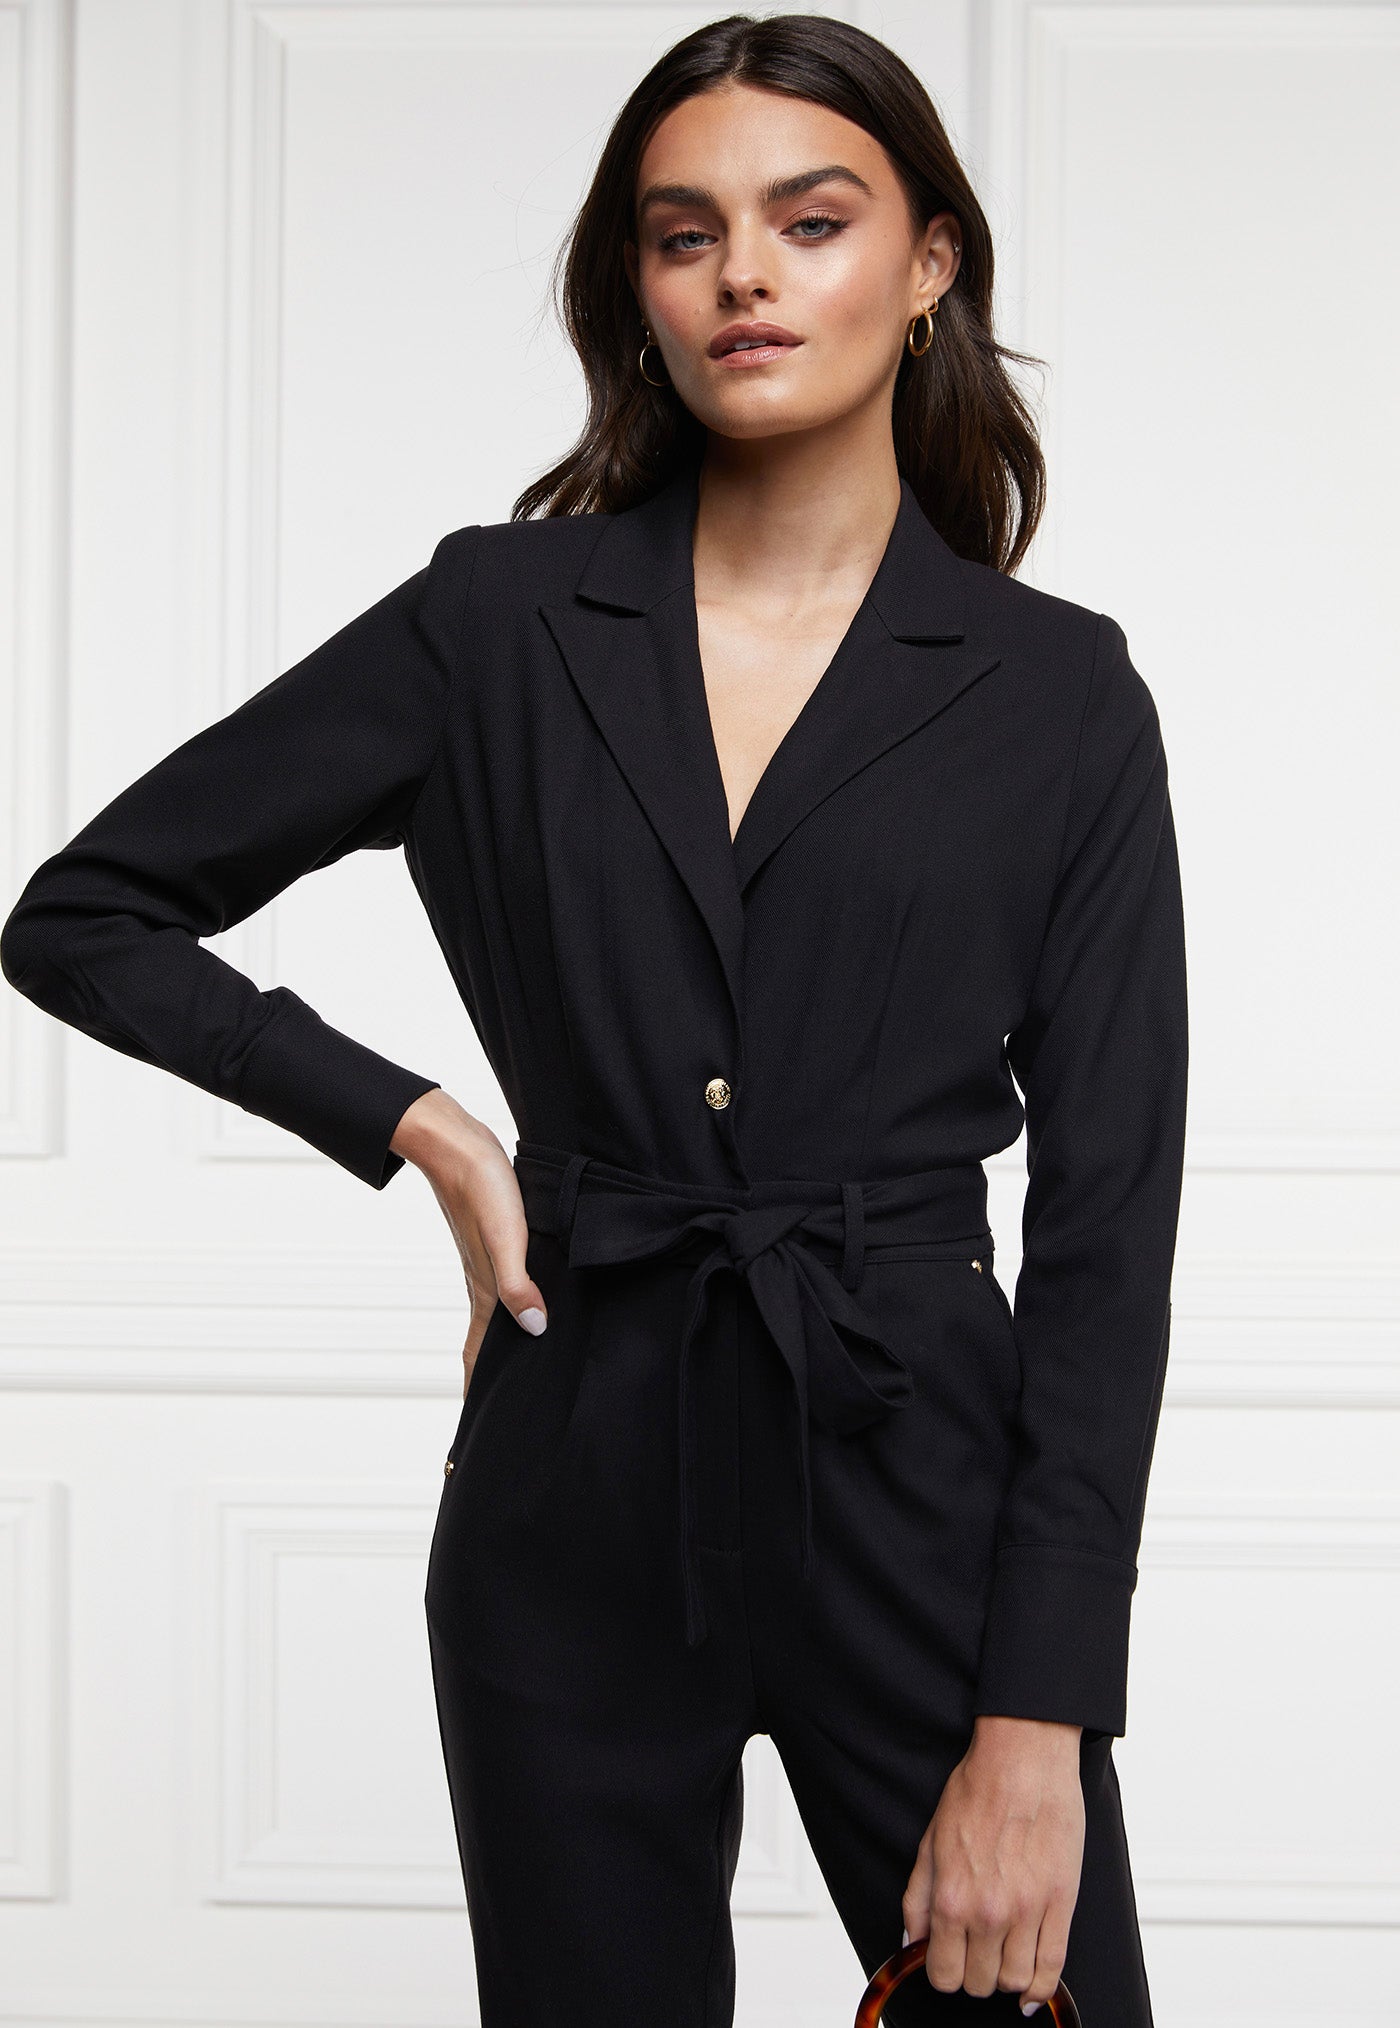 Tailored Jumpsuit - Black sold by Angel Divine